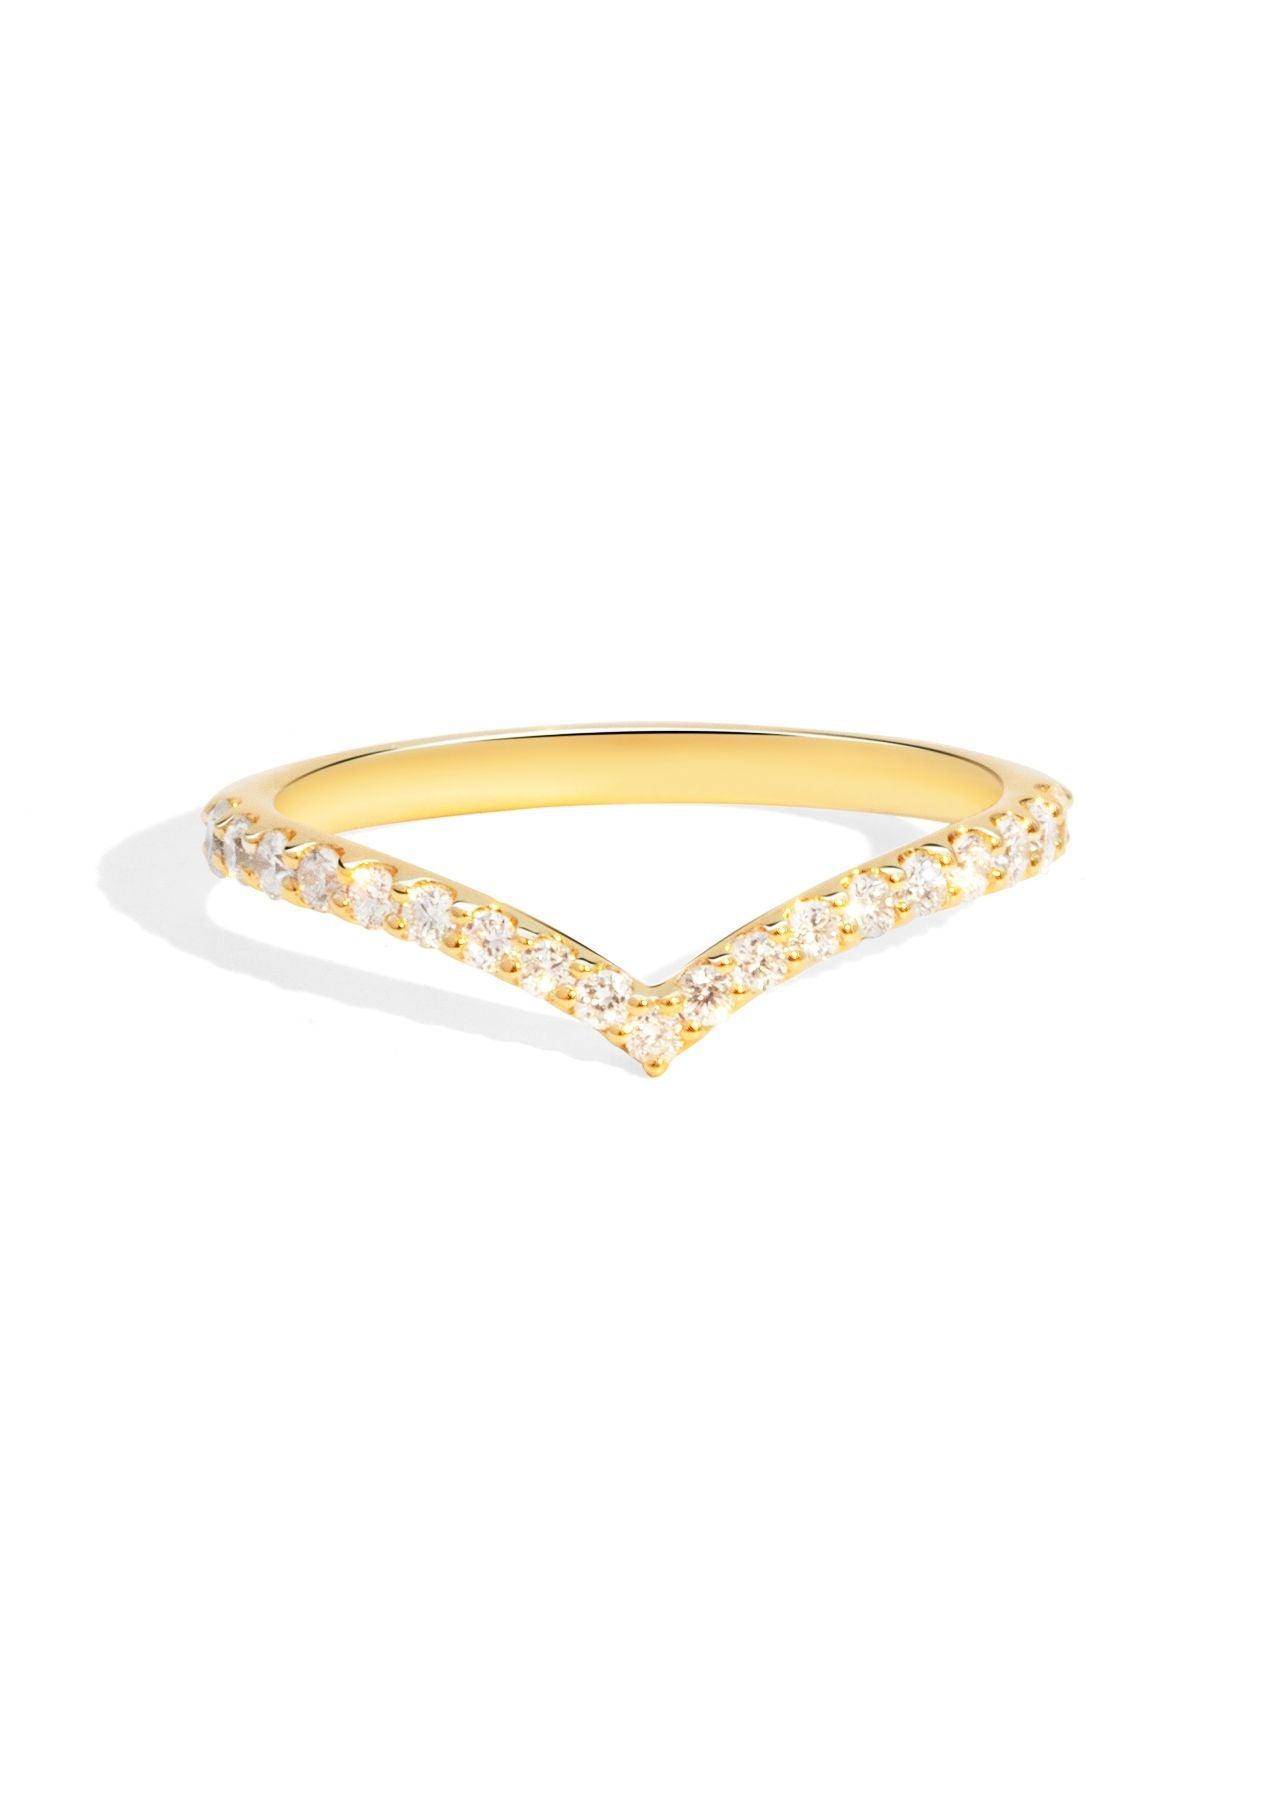 The Allude Yellow Gold Diamond Band